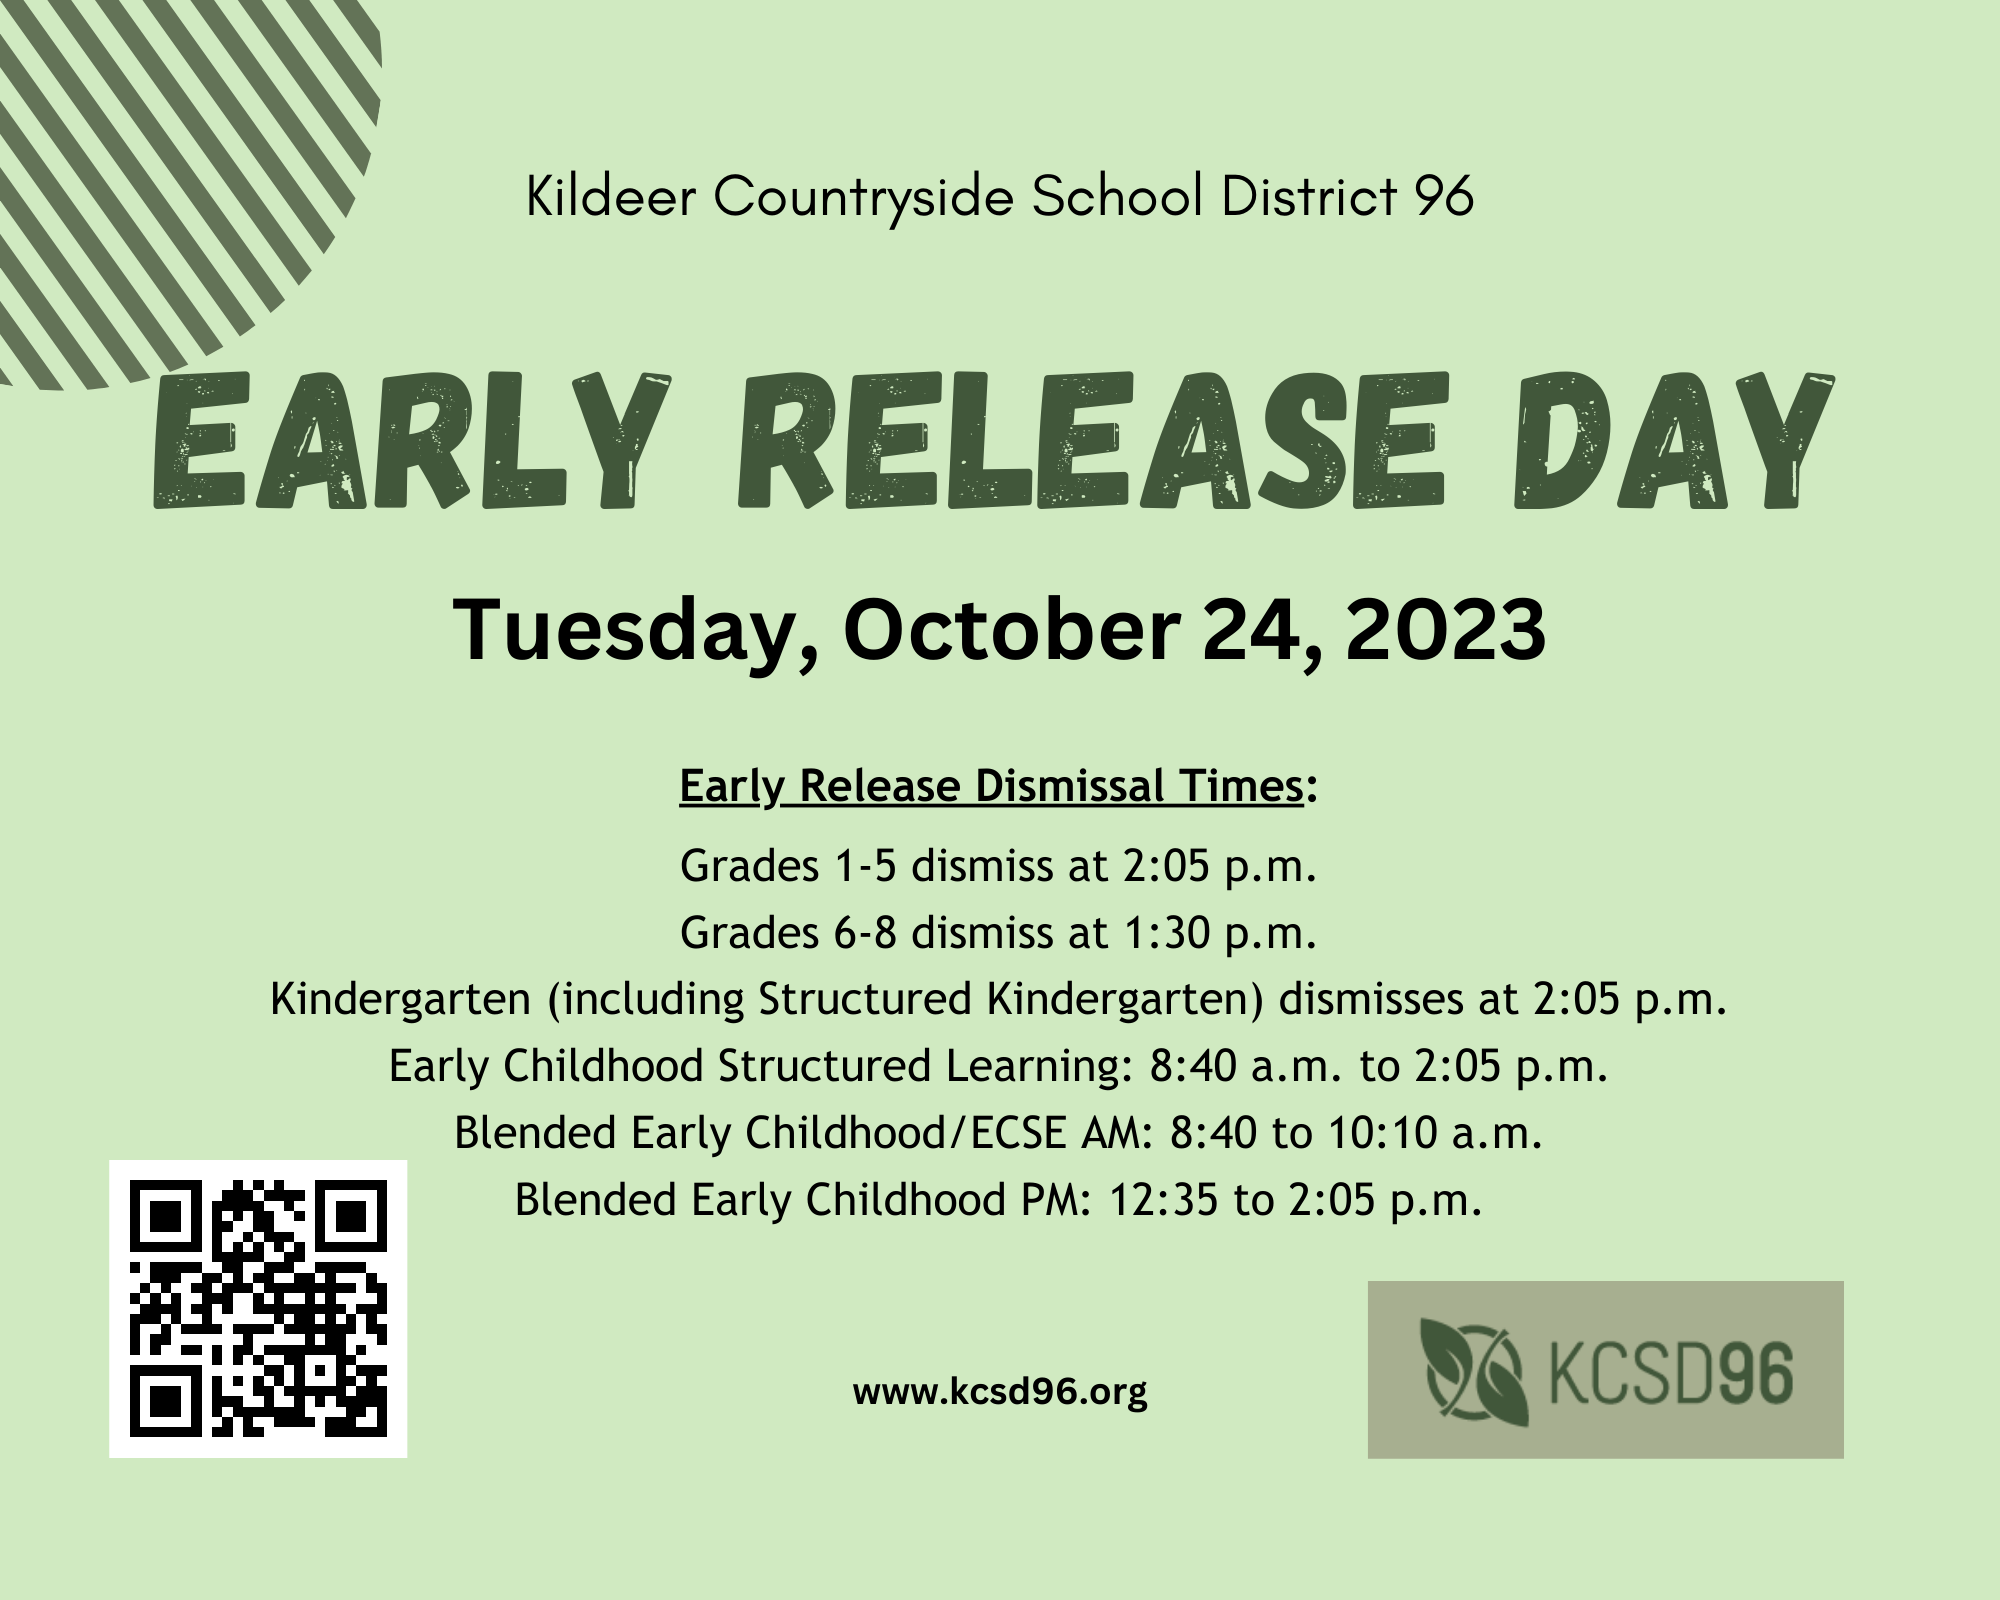 Early Release for October 24, 2023